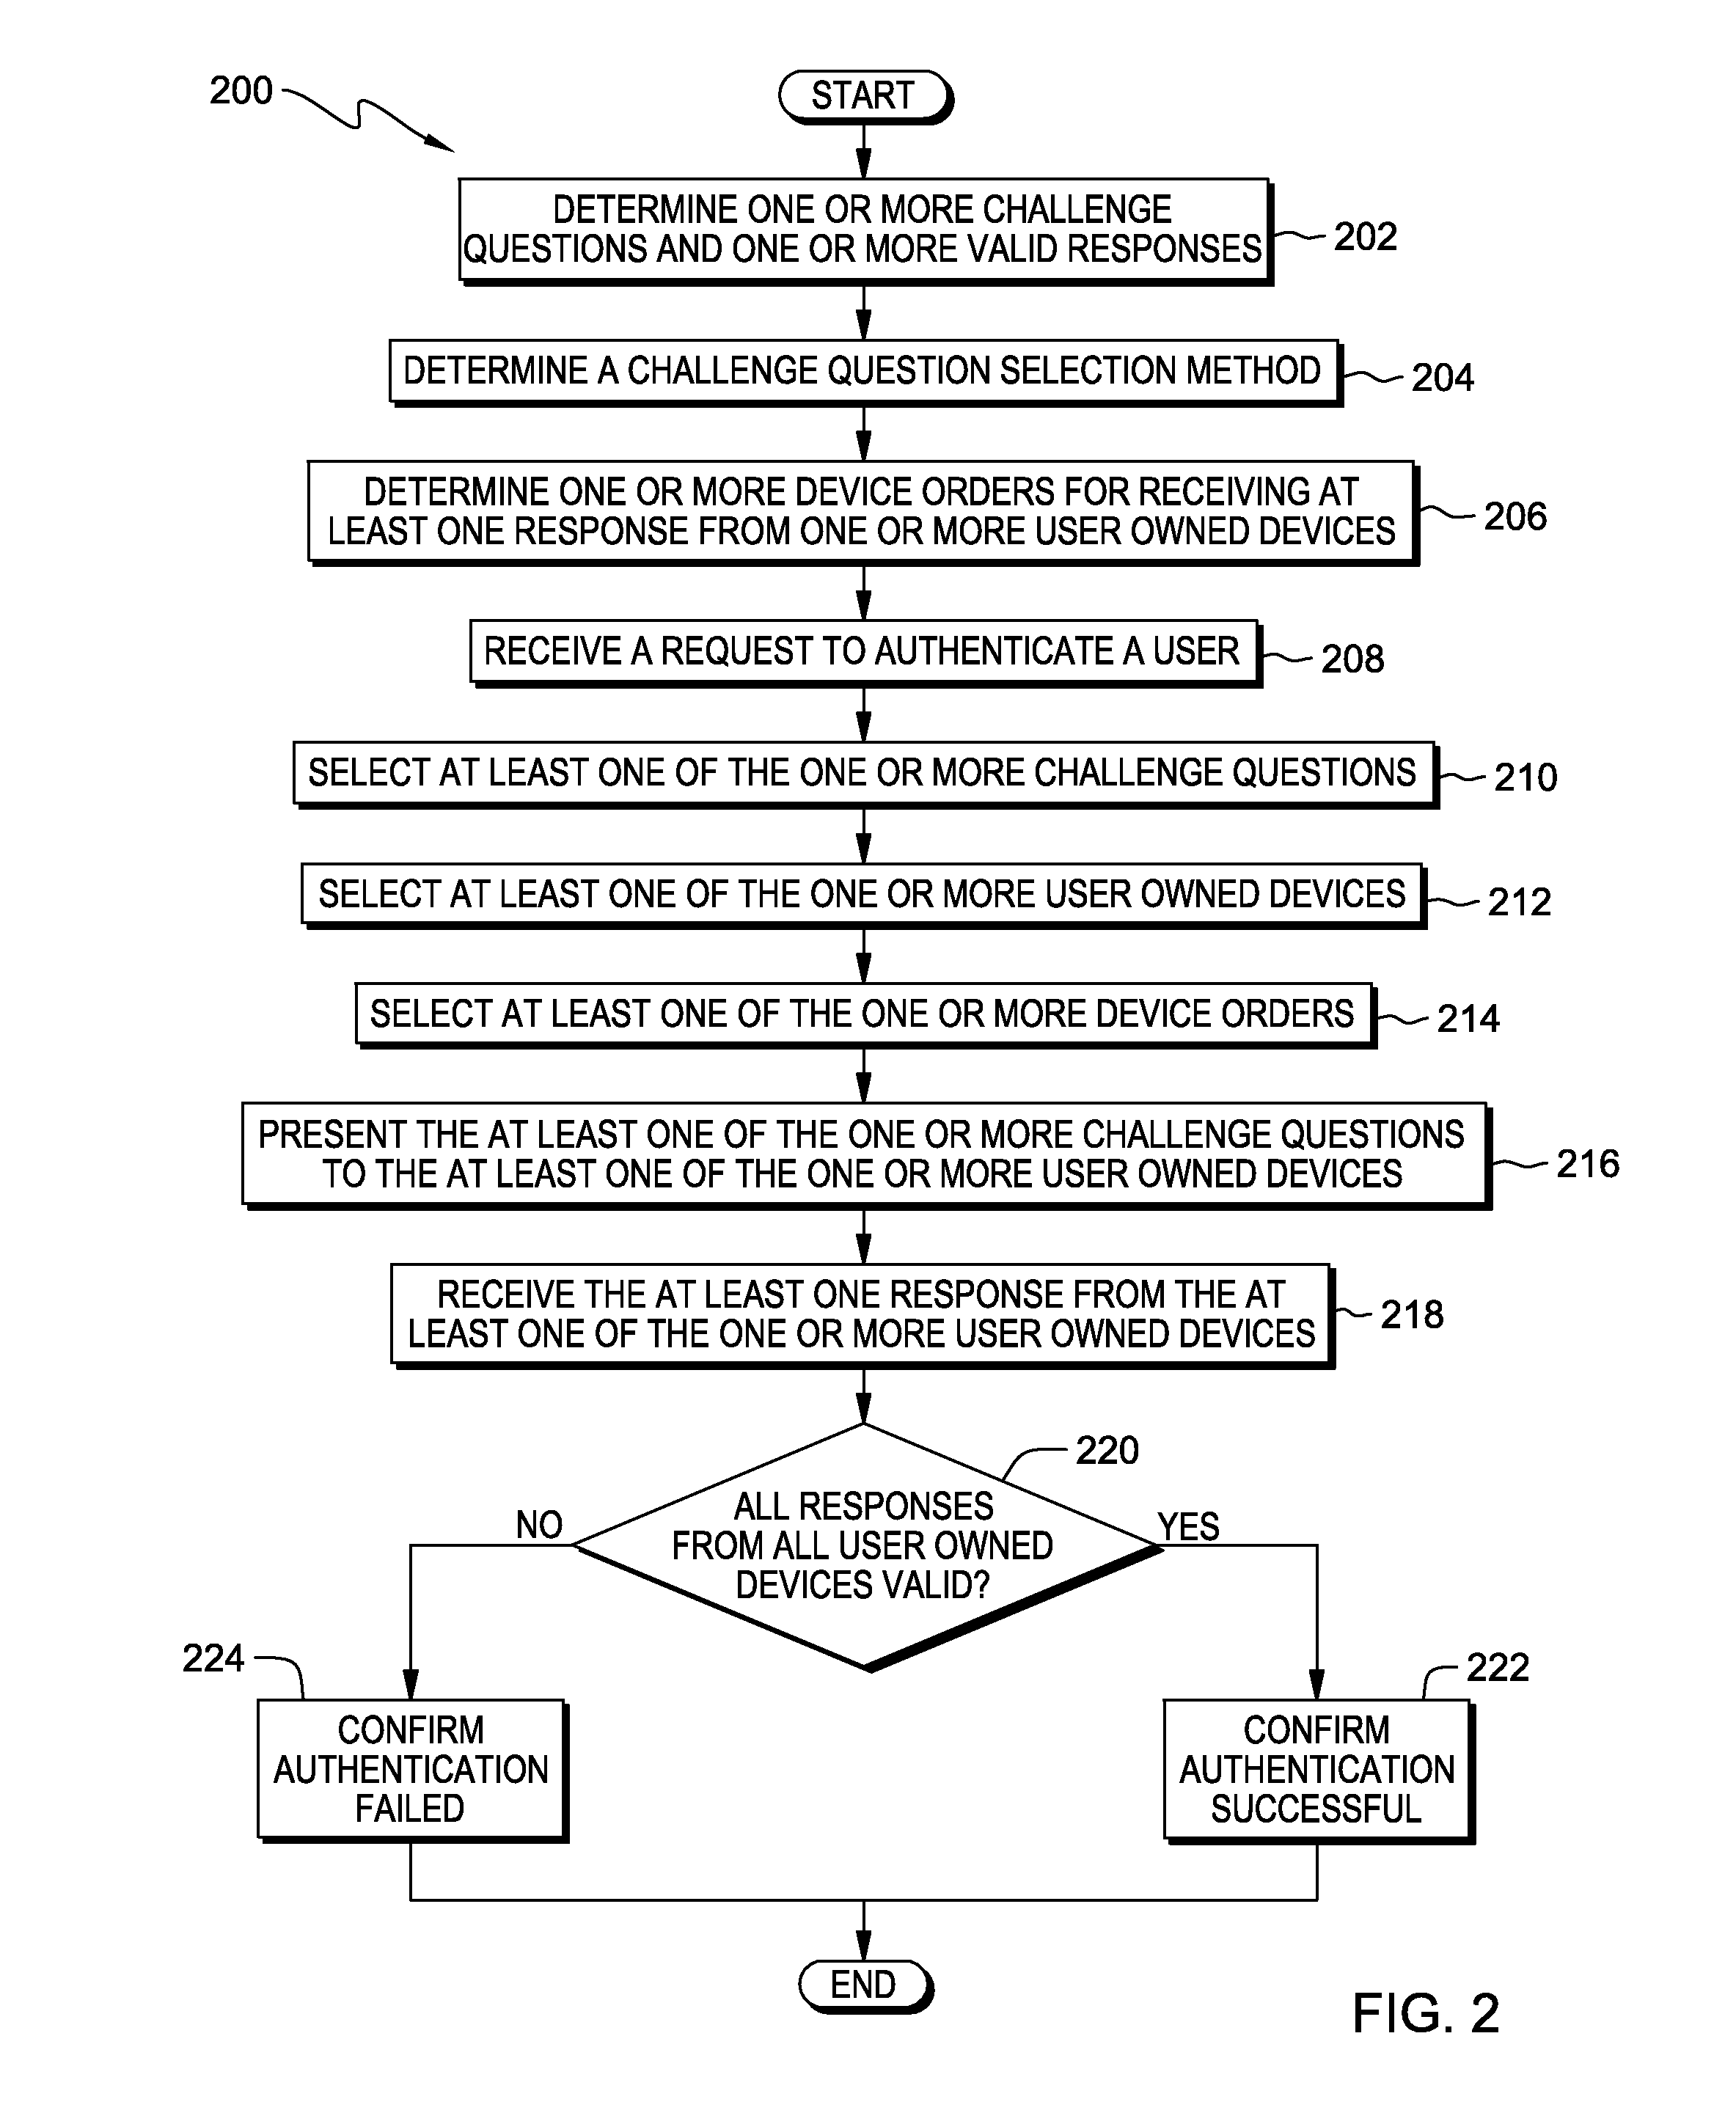 Credential validation using multiple computing devices